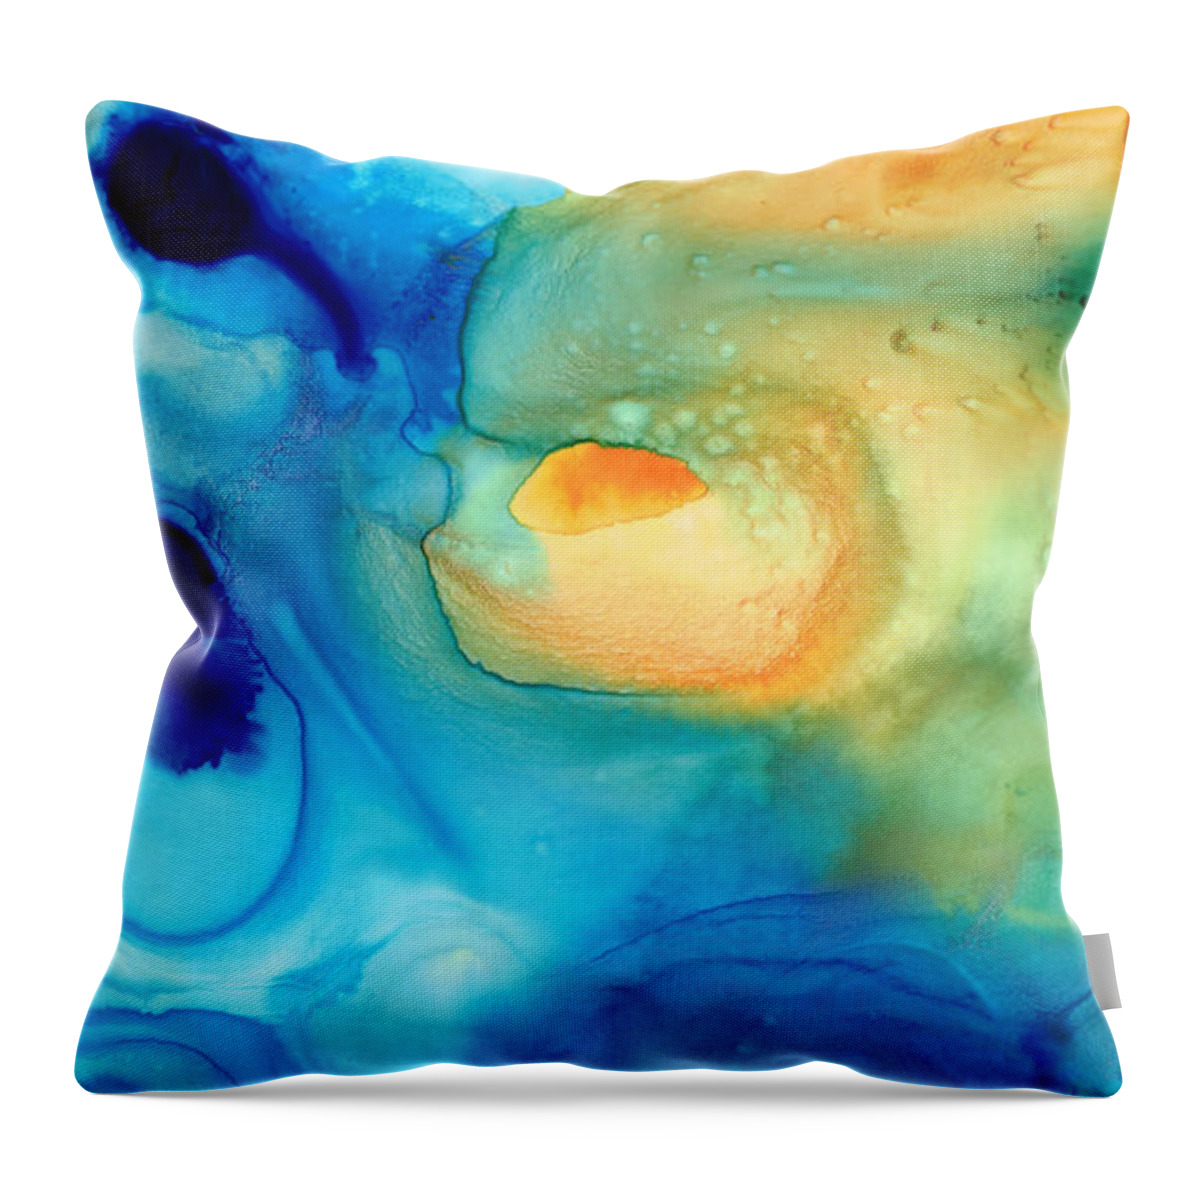 Abstract Throw Pillow featuring the painting Warm Tides - Abstract Art By Sharon Cummings by Sharon Cummings